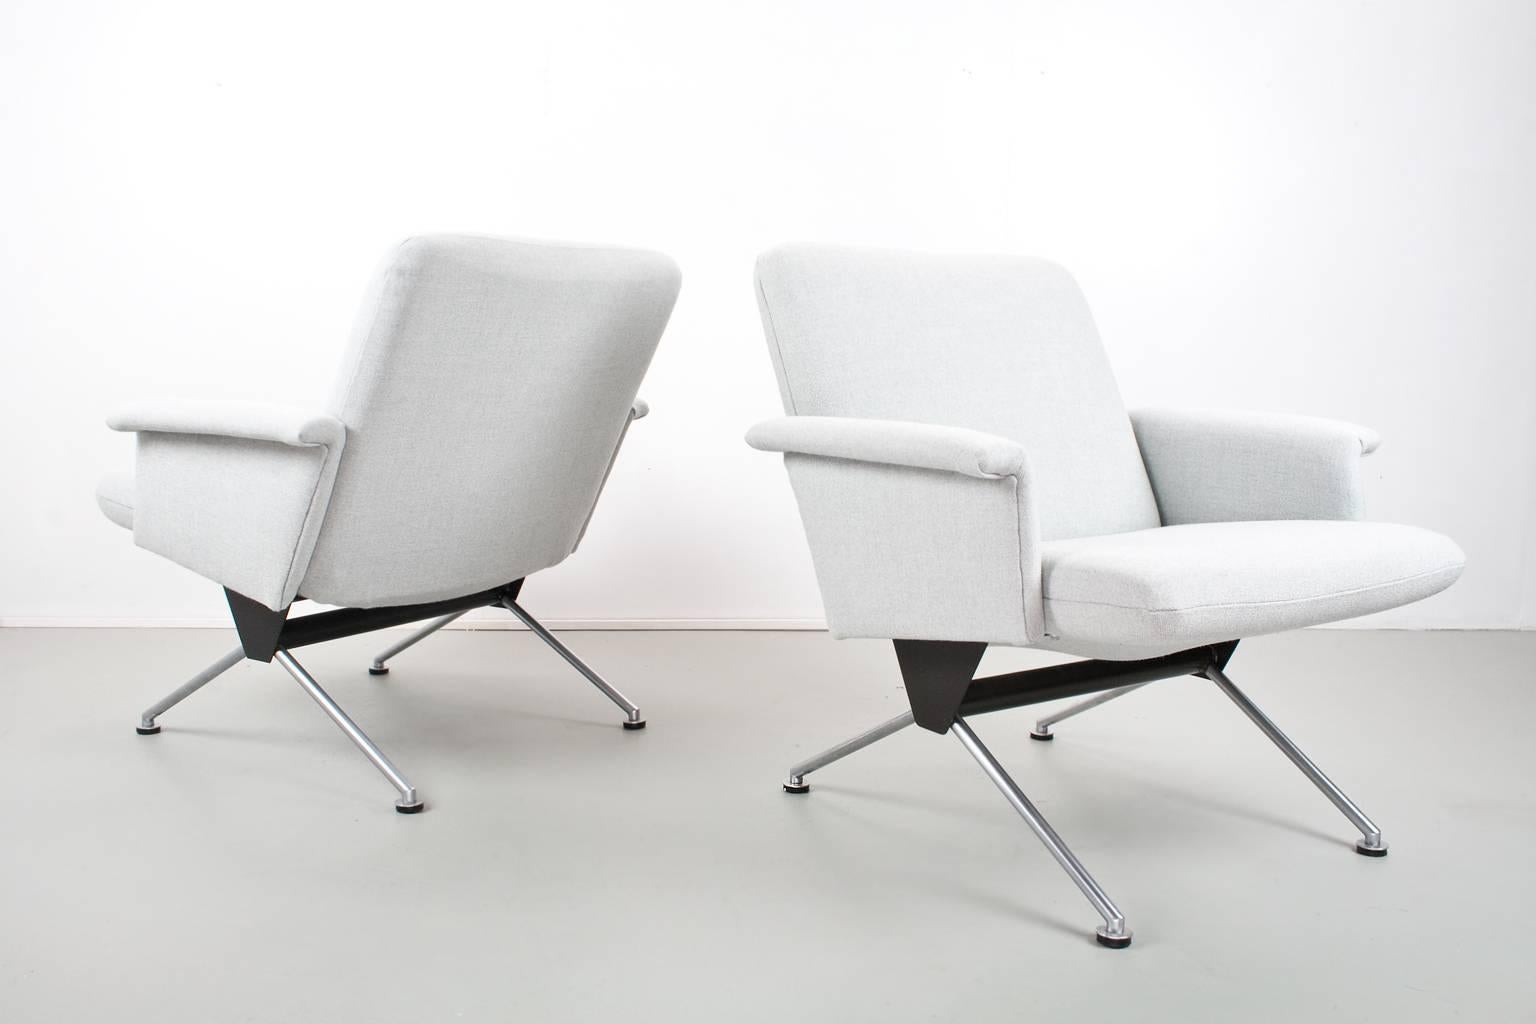 Set of two midcentury Dutch lounge chairs, model 1432, designed by Andre Cordemeyer for Gispen in 1961, the Netherlands. Lounge chairs with armrests, new upholstered in a excellent light grey Ploegwool (color no.08, 100% woven wool), placed on the